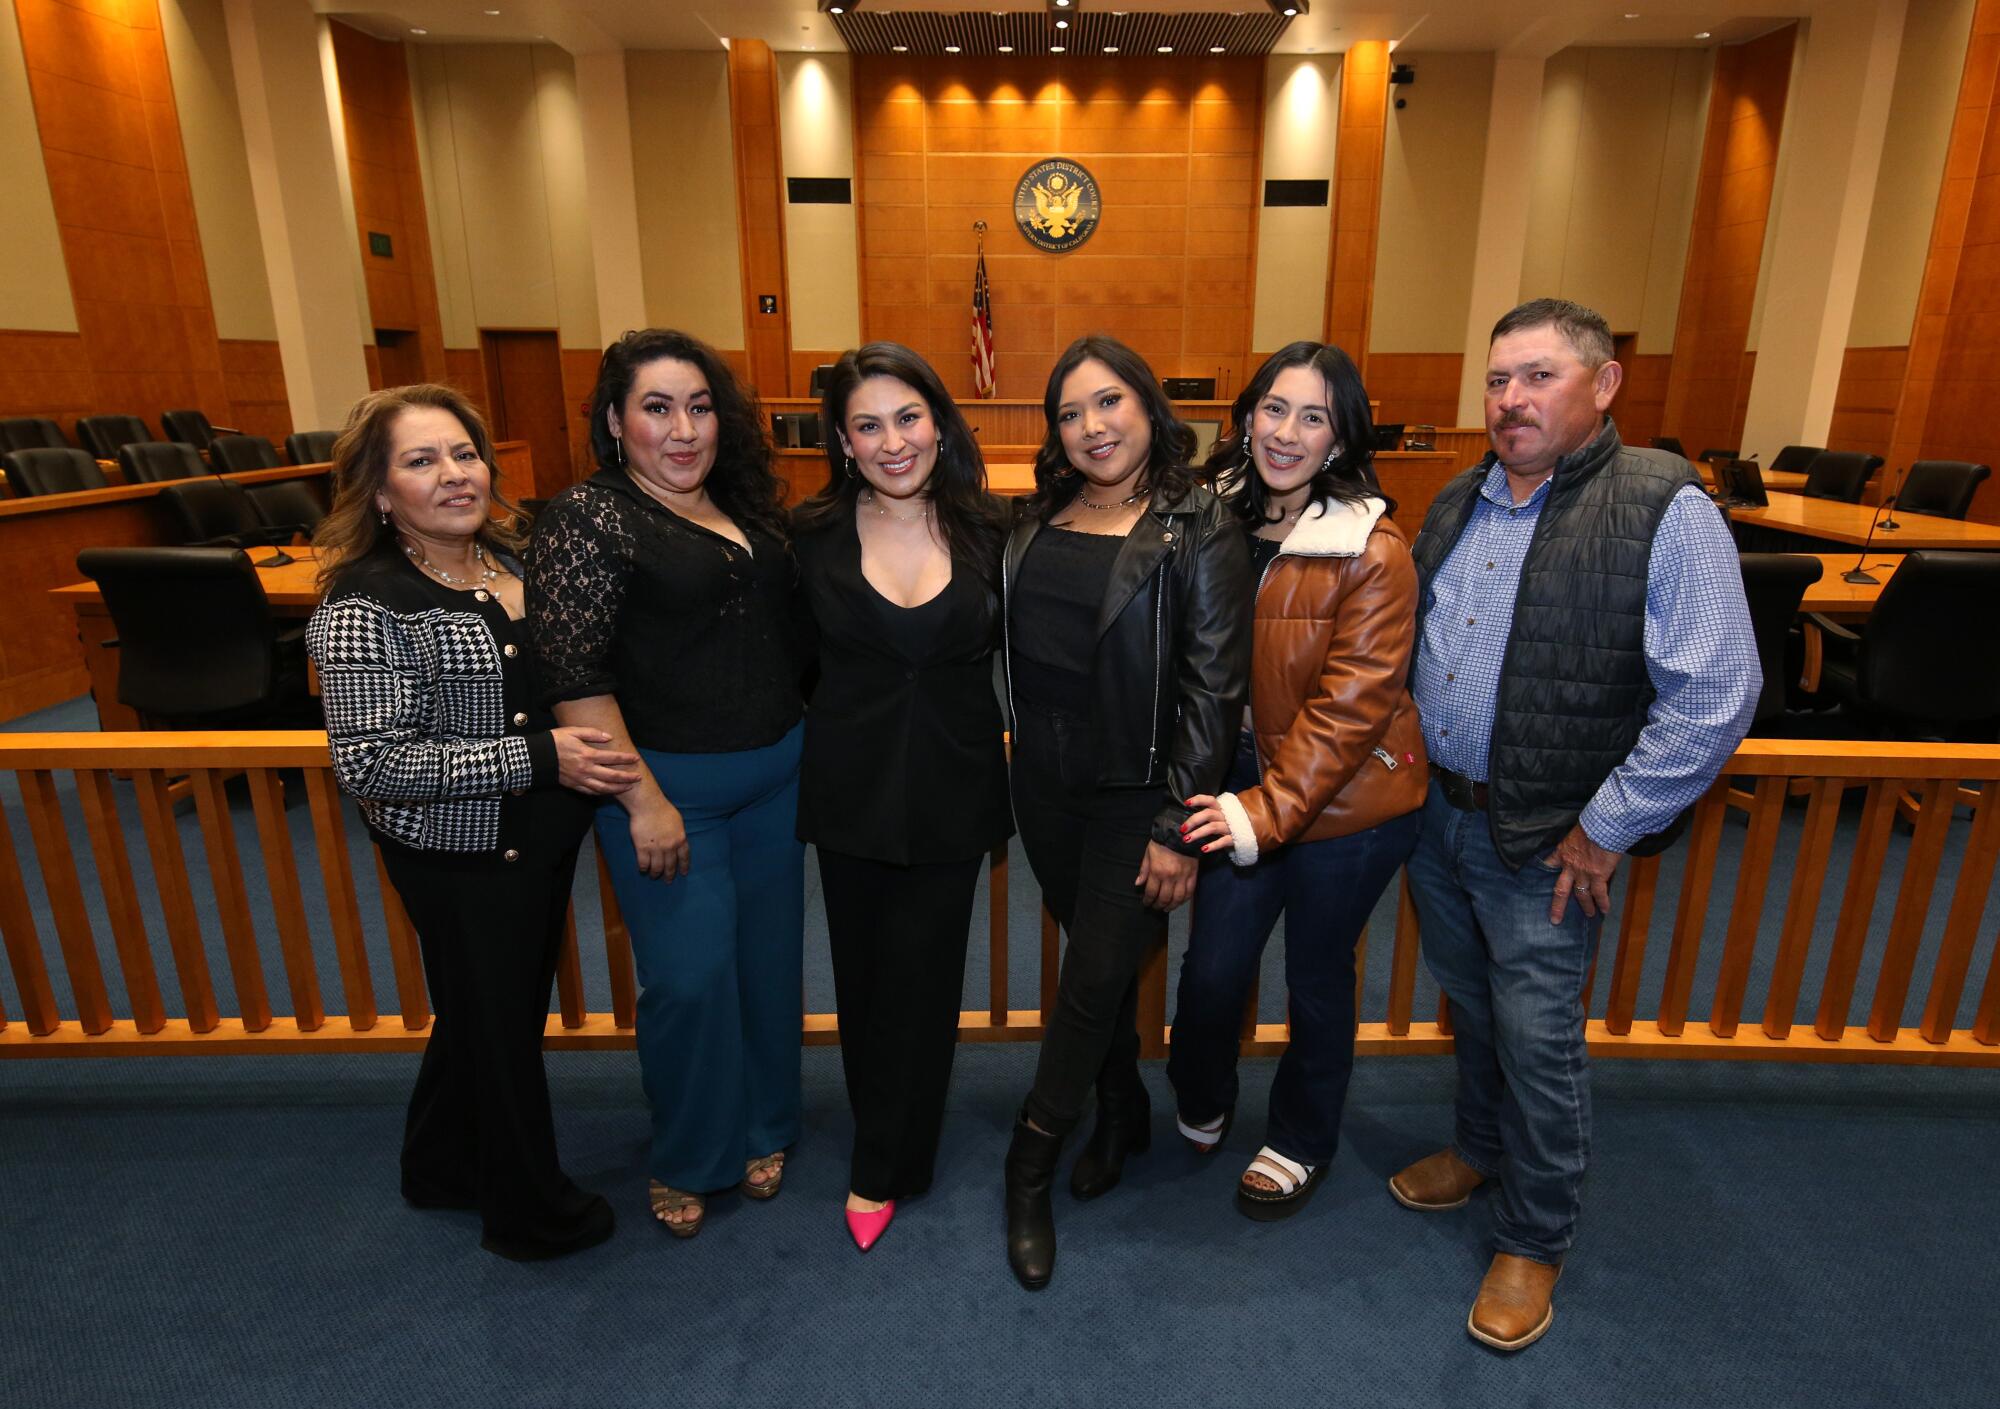 From left to right, Vilma Nunez and daughters, Karen Callejas, Jessenia, Jennifer, Lisset and husband, Rafael before a swear